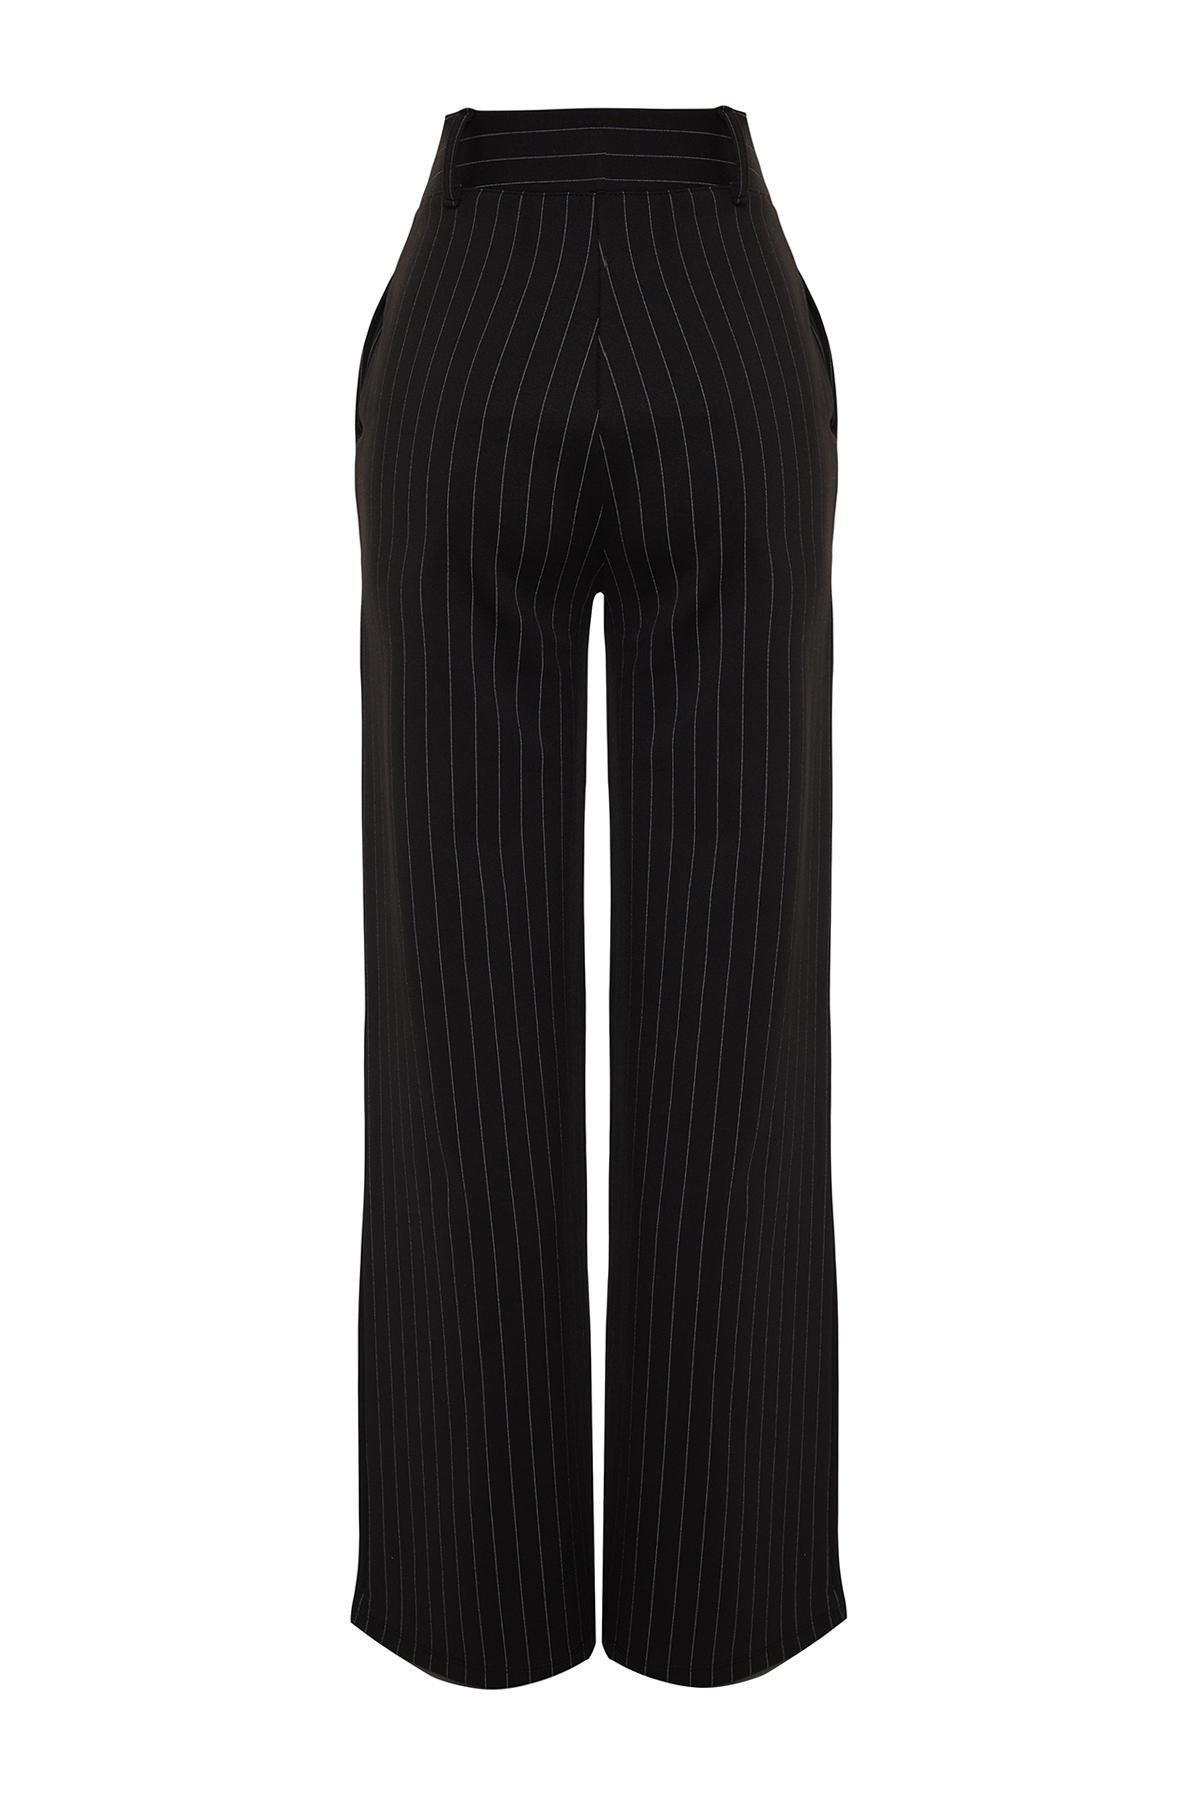 Trendyol - Black Striped Straight High Waist Knitted Pants